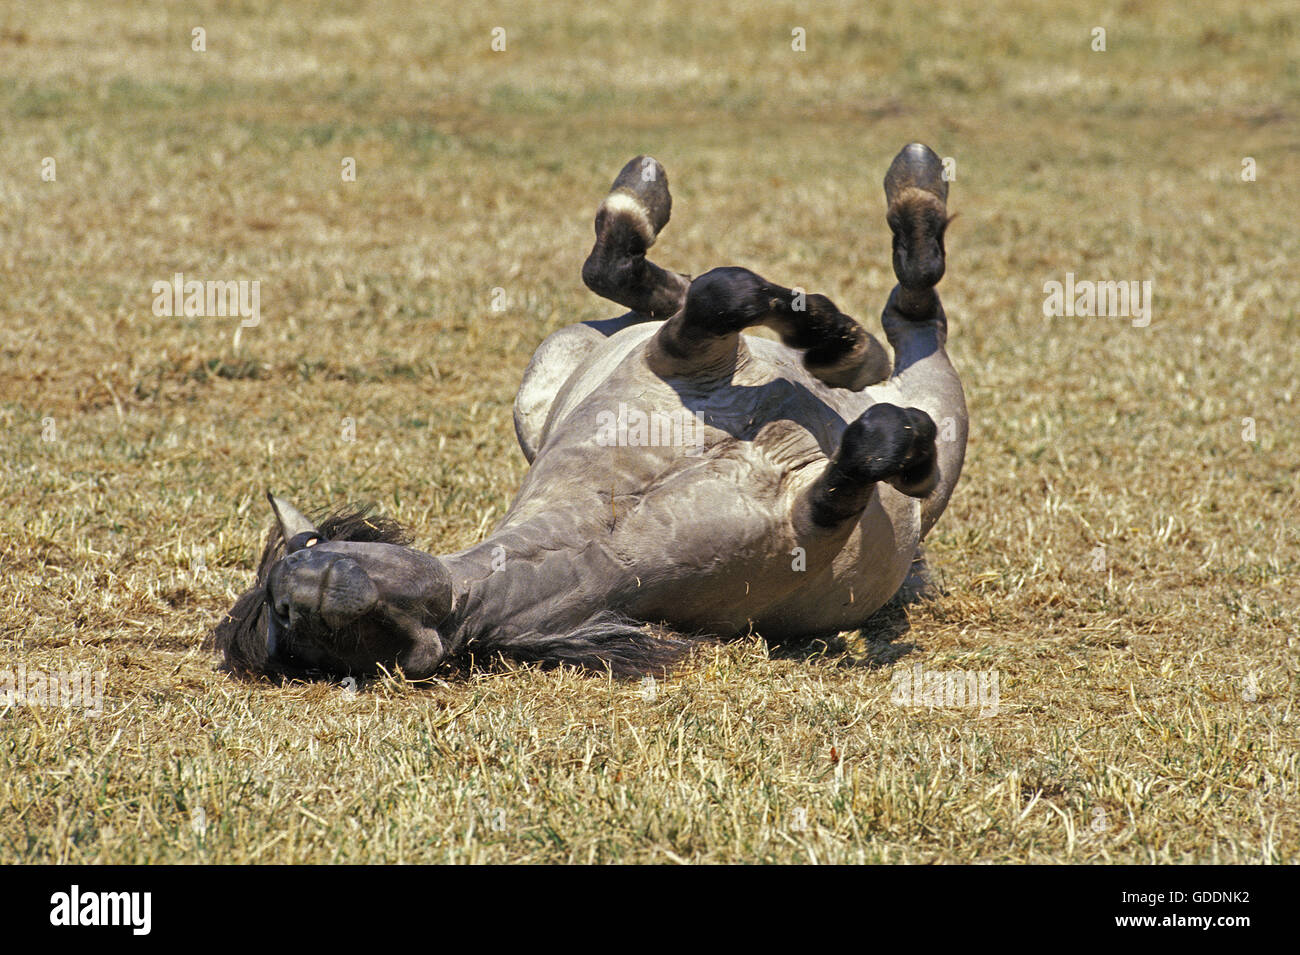 Tarpan Horse, equus caballus gmelini, Adult Rolling on Back in Grass Stock Photo